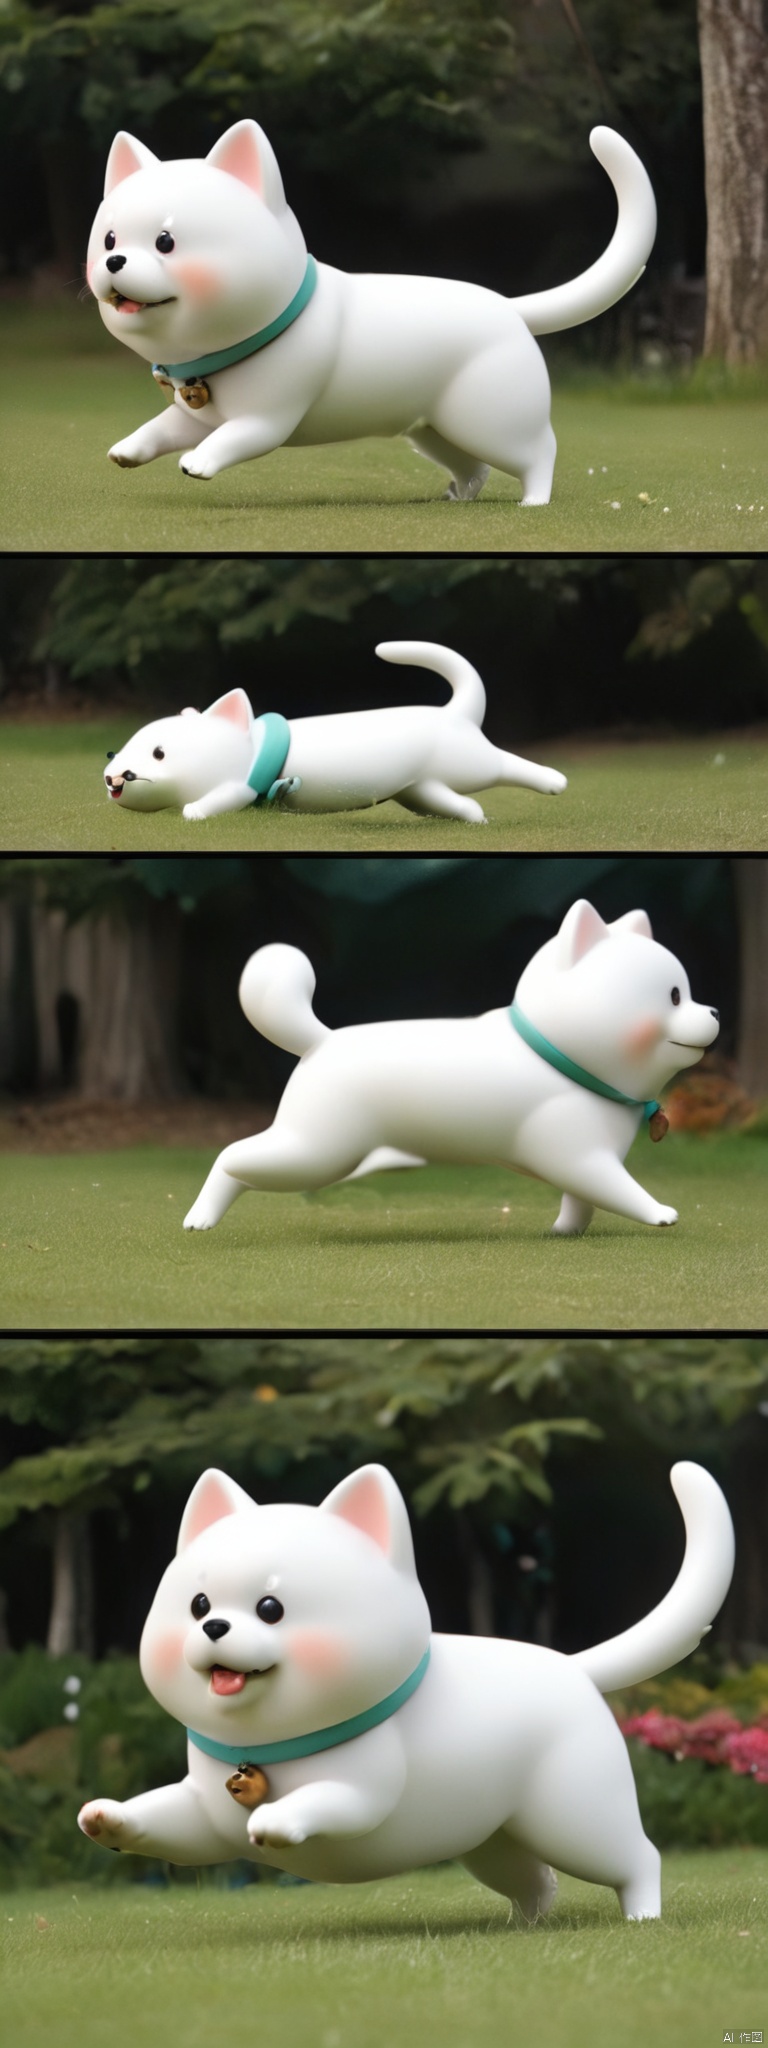 The dog has a fluffy body, black and white hair, round eyes, and a flexible small tail. It is very lively, always running around, full of curiosity.